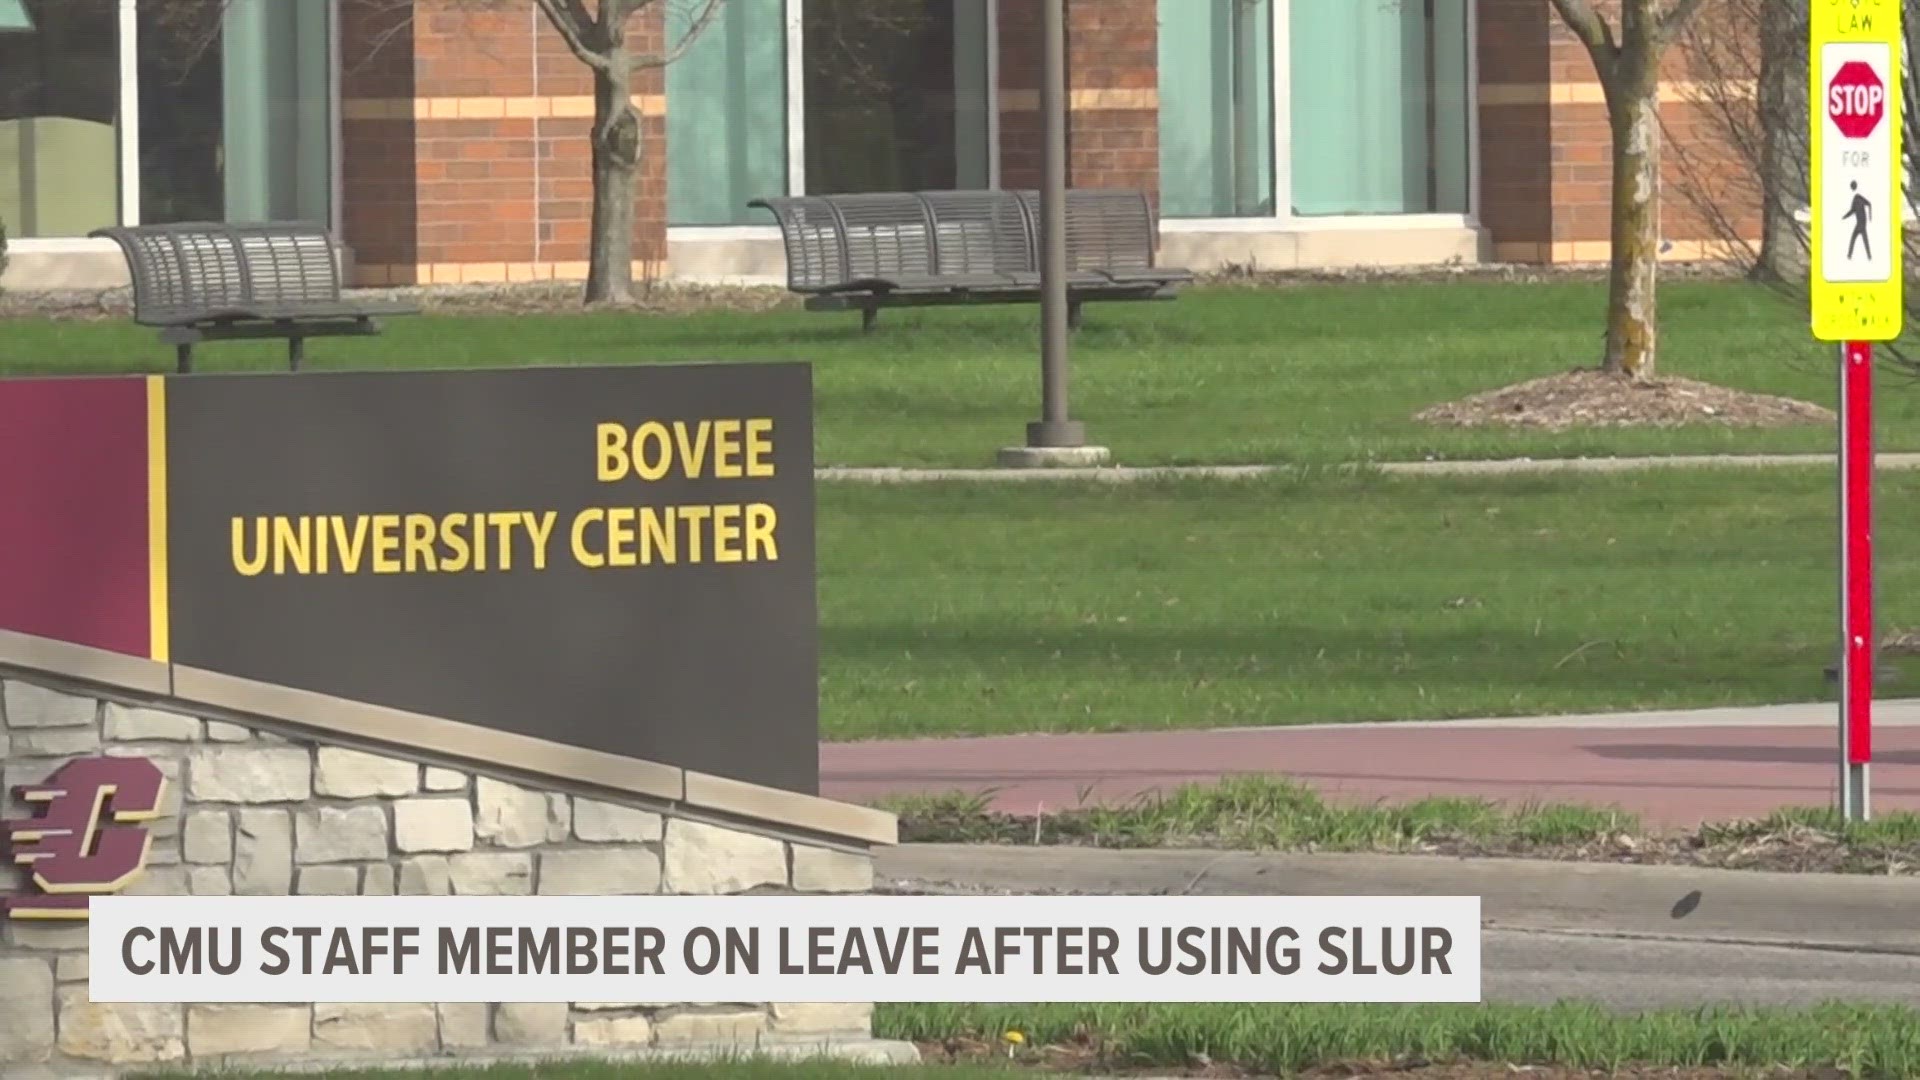 One Central Michigan University student said the incident happened during a meeting to address racial slurs being used on campus.